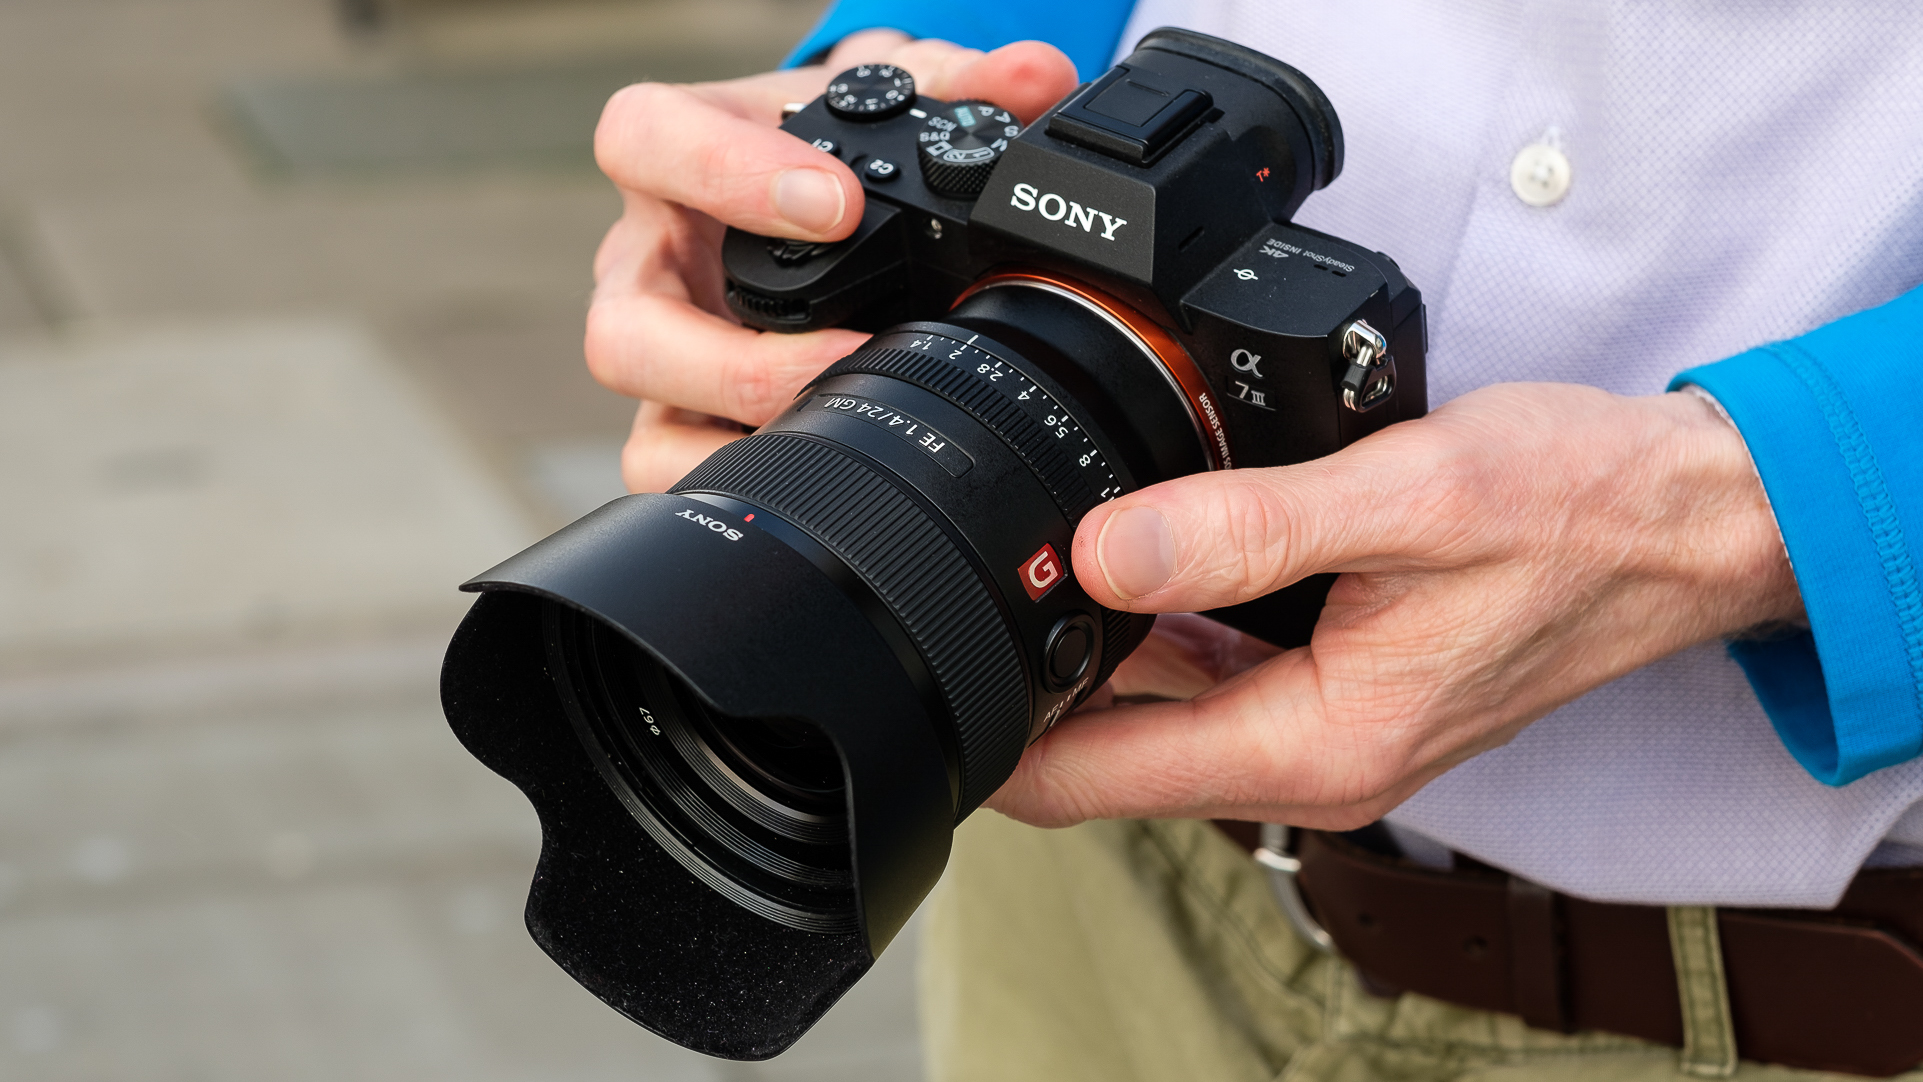 Sony a7 III (Alpha ILCE-7M3) Compact System Camera with 28-70mm Zoom Lens,  4K Ultra